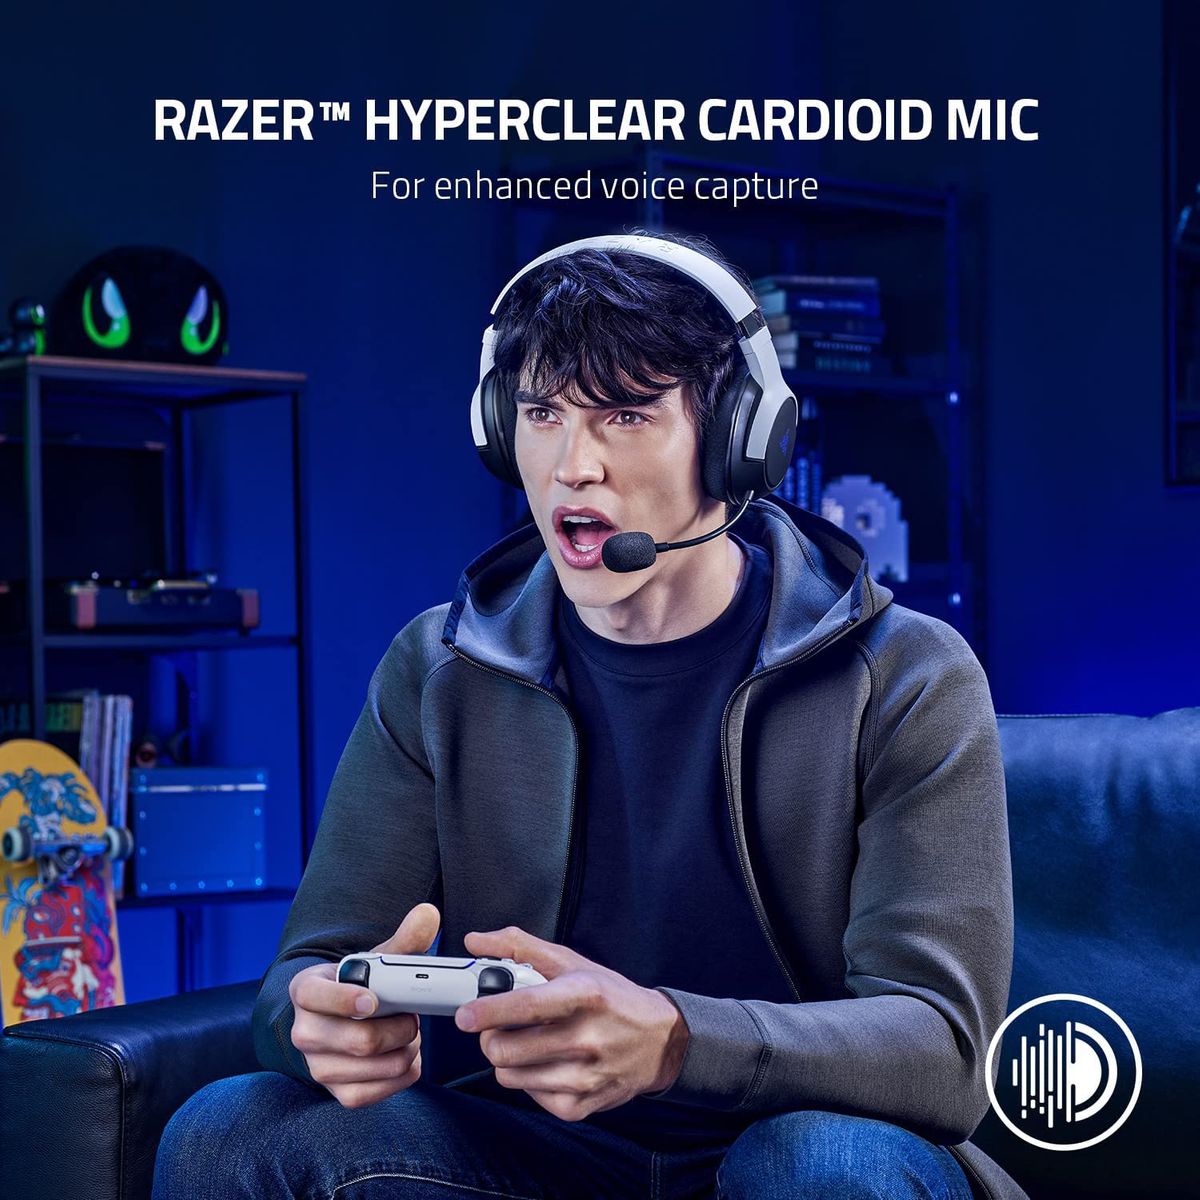 Razer Kaira for PlayStation Gaming Headset Dual Wireless Stereo for PS PC Mobile Mercury